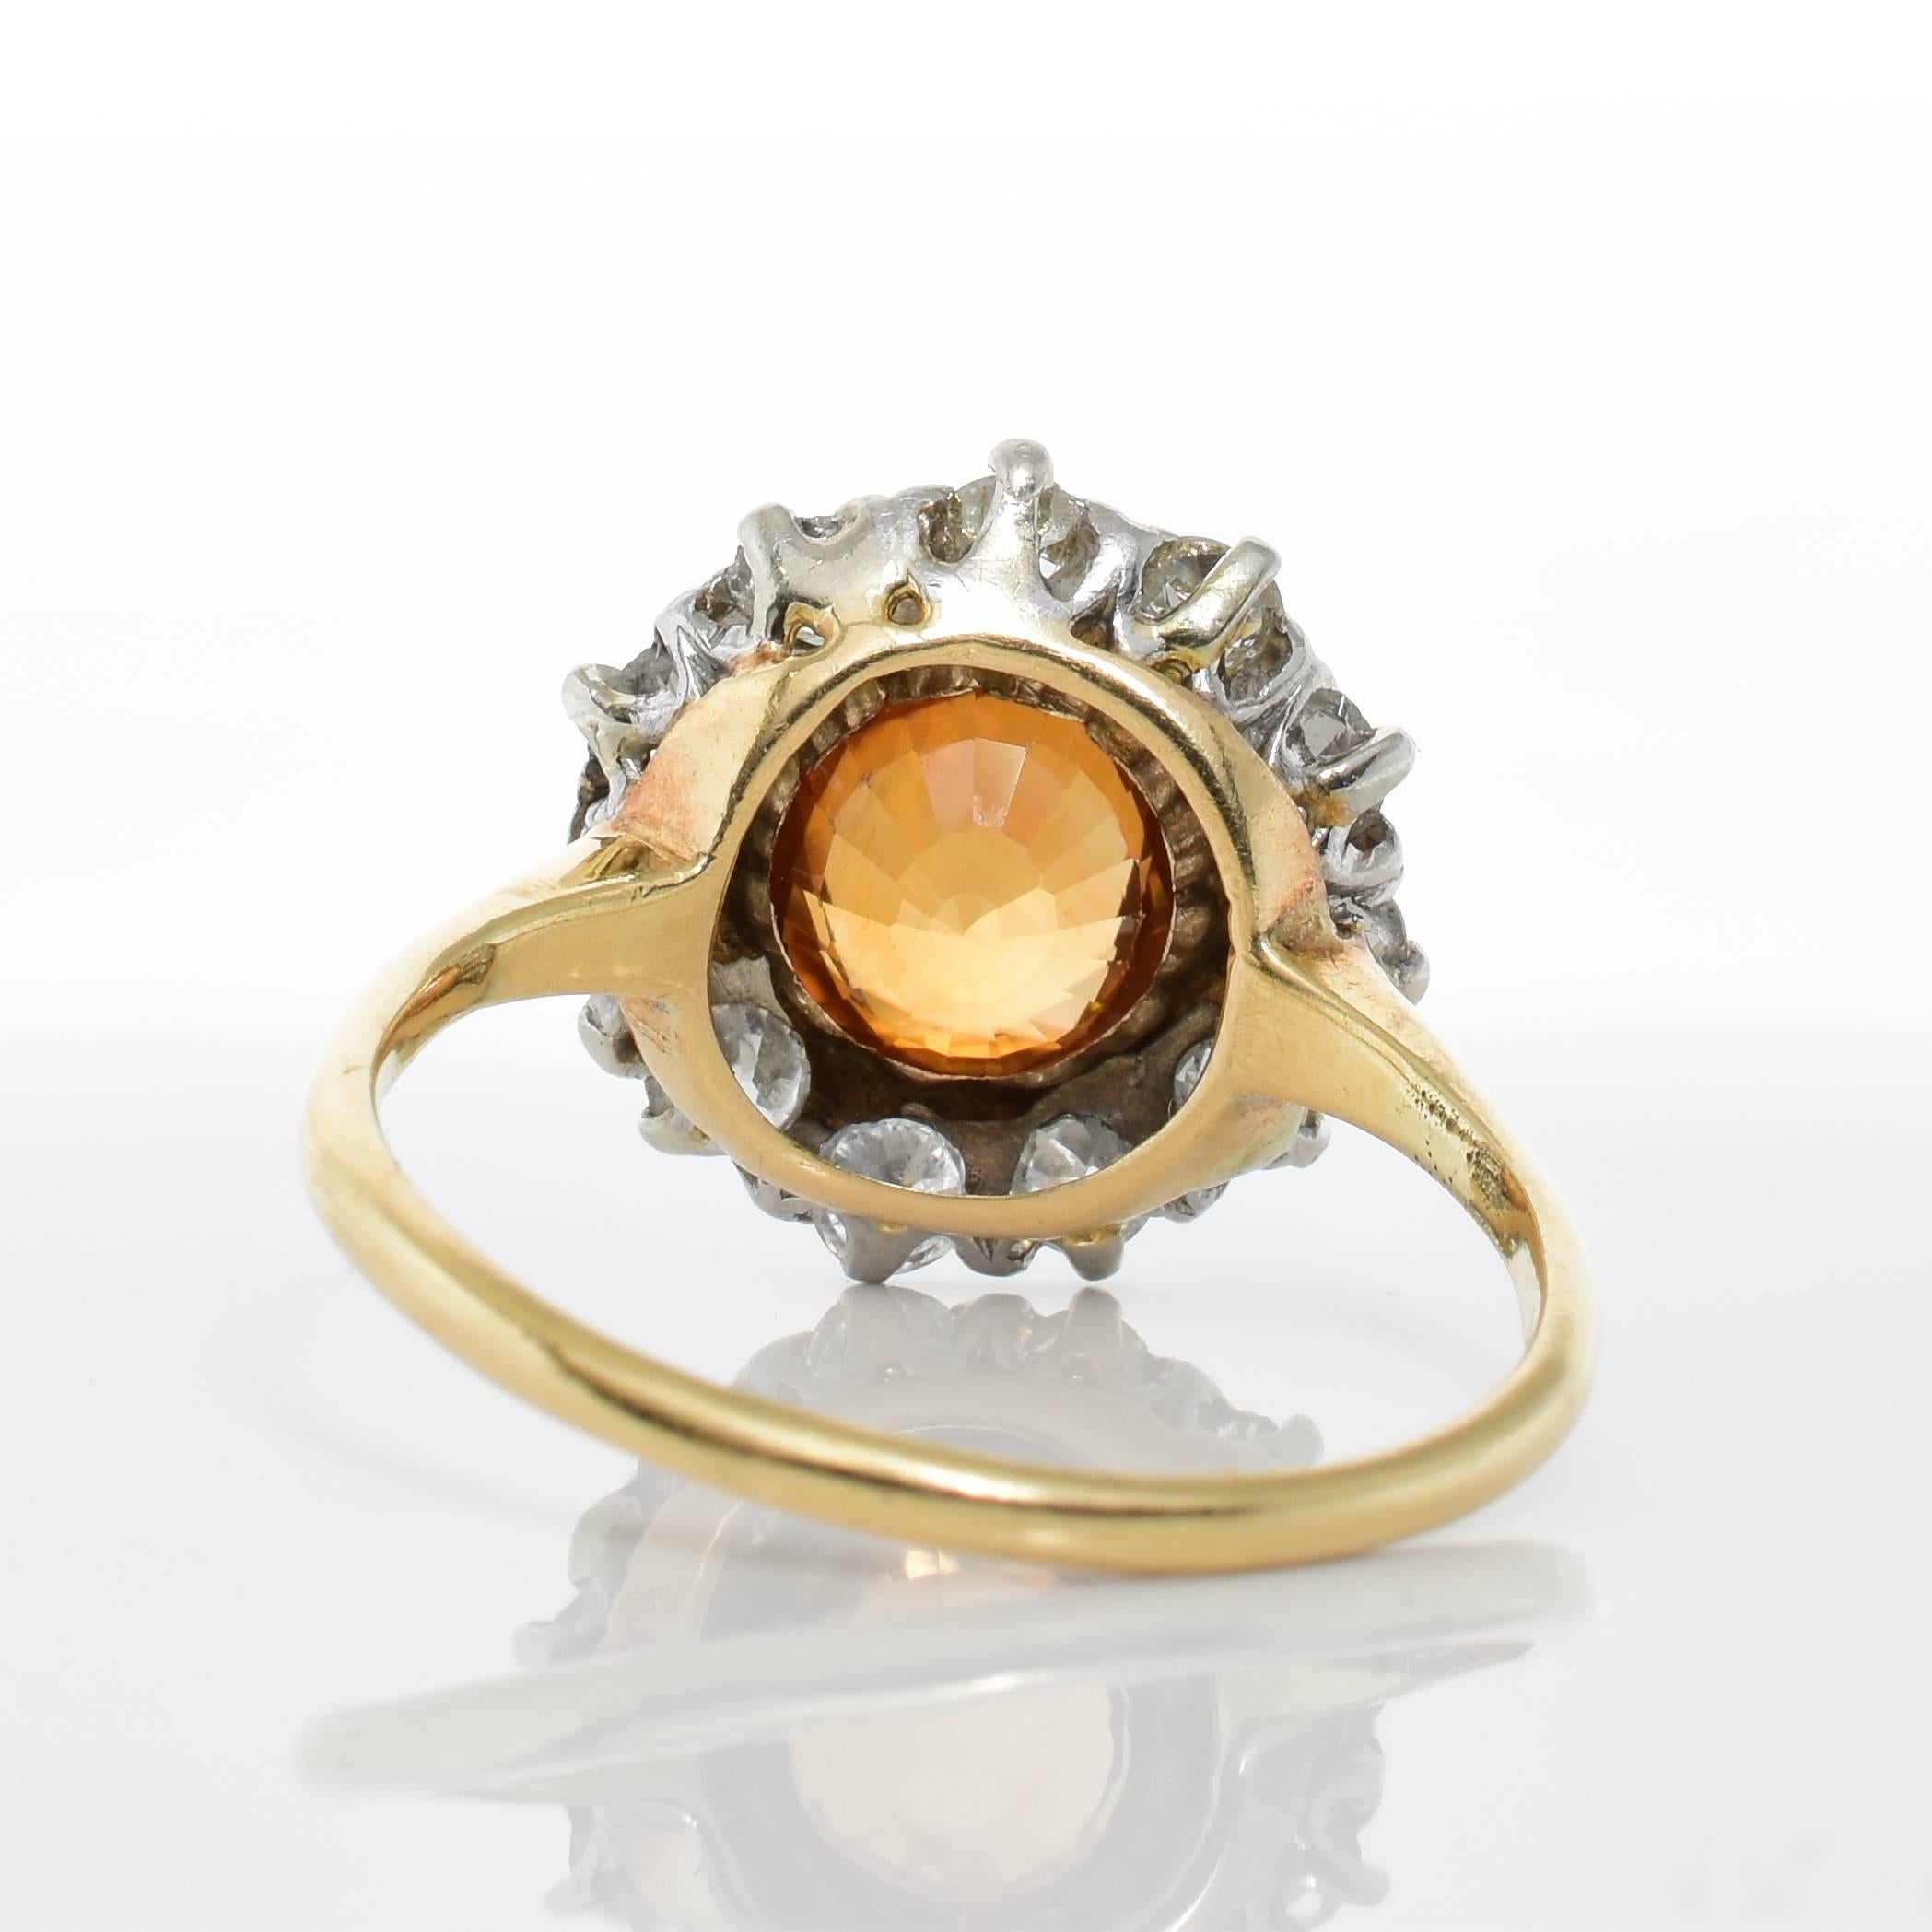 1.82 Carat Zircon Diamond Gold Cluster Ring In Good Condition For Sale In Los Angeles, CA